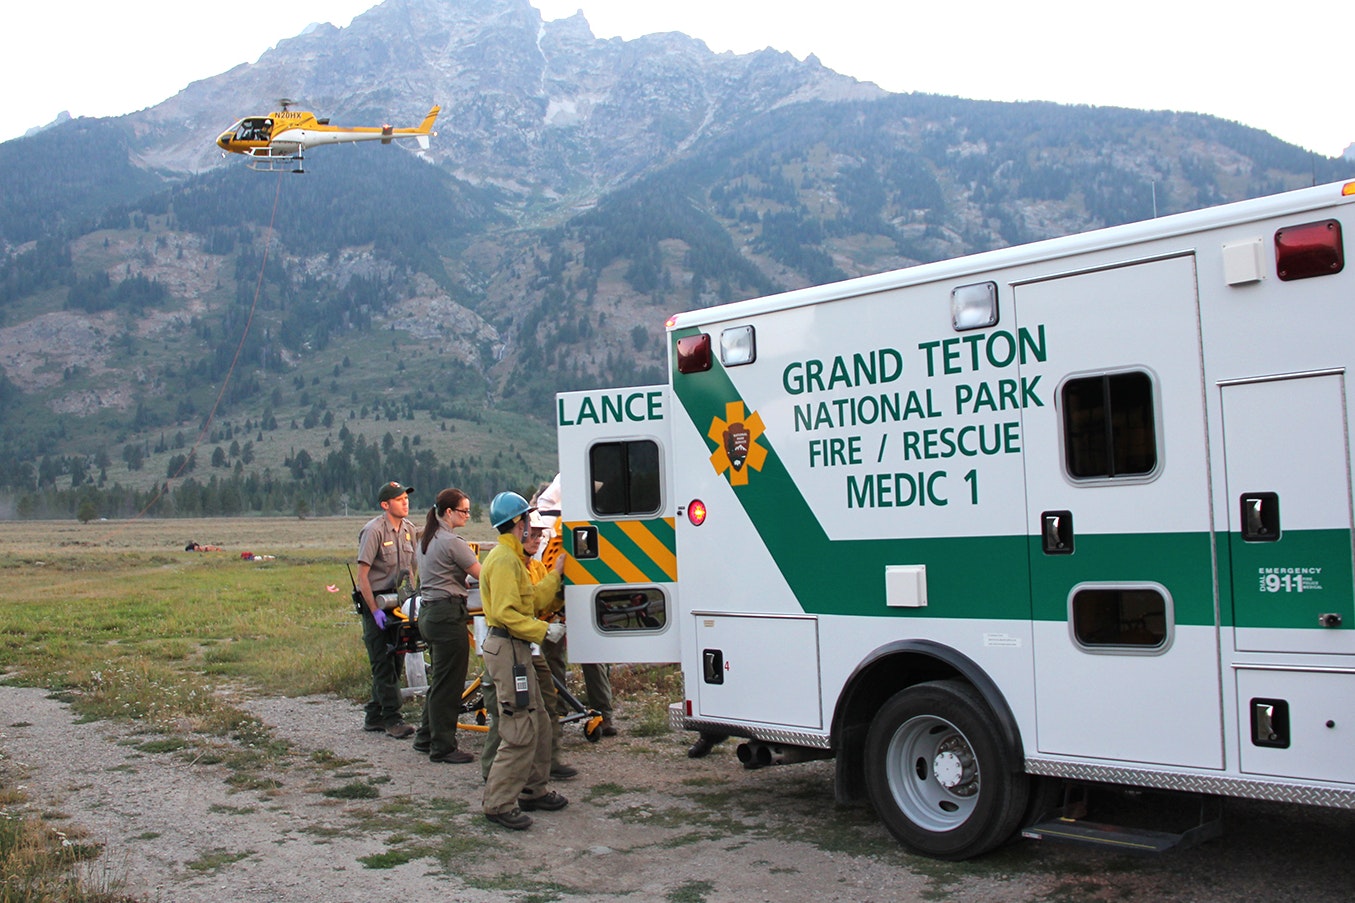 A search and rescue operation from the Jenny Lake Rescue Cache near Lupine Meadows in this file photo.